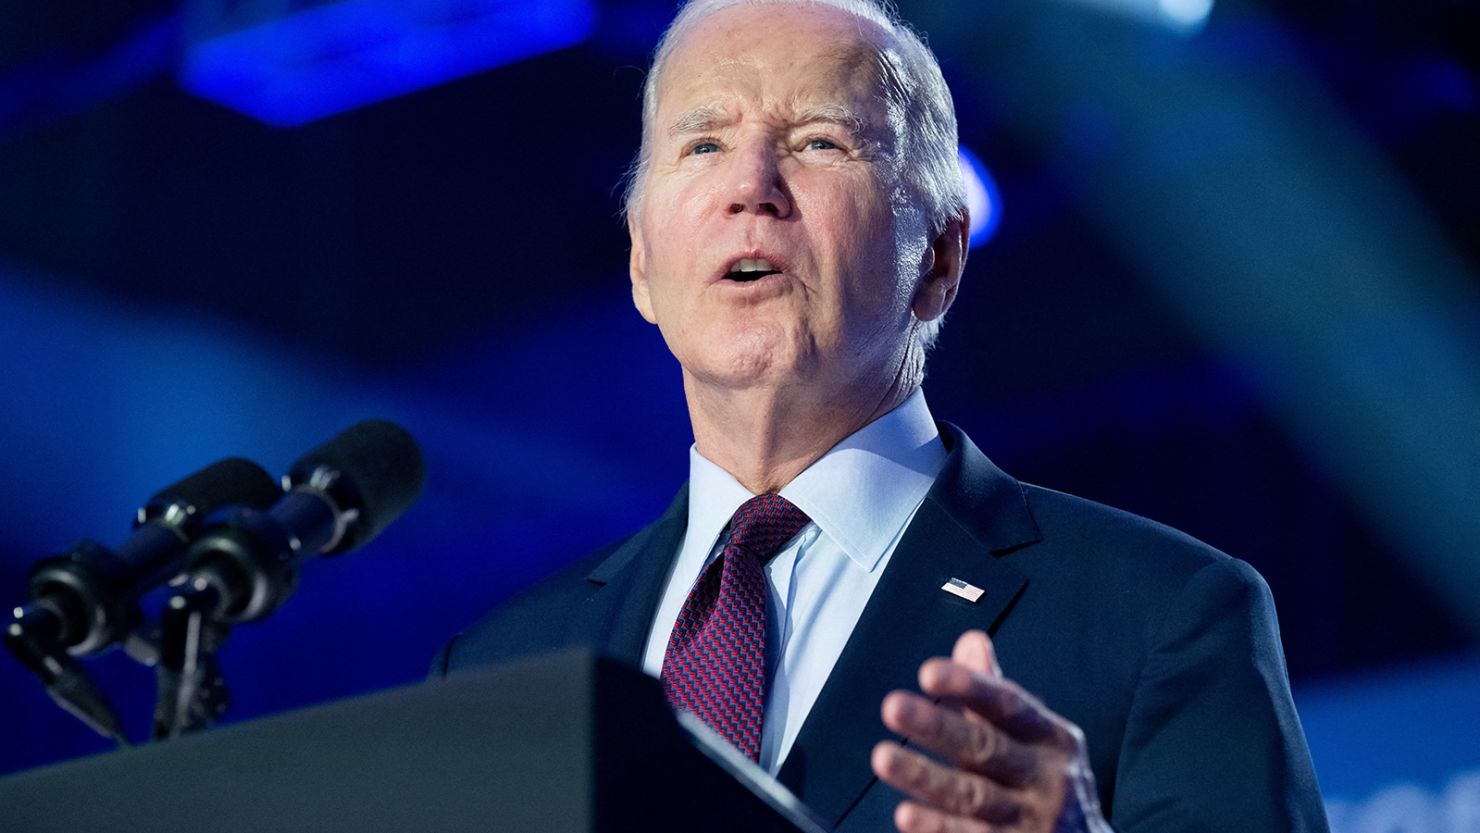 US President Joe Biden speaks at a campaign rally at Pearson Community Center in Las Vegas, Nevada, on February 4, 2024.